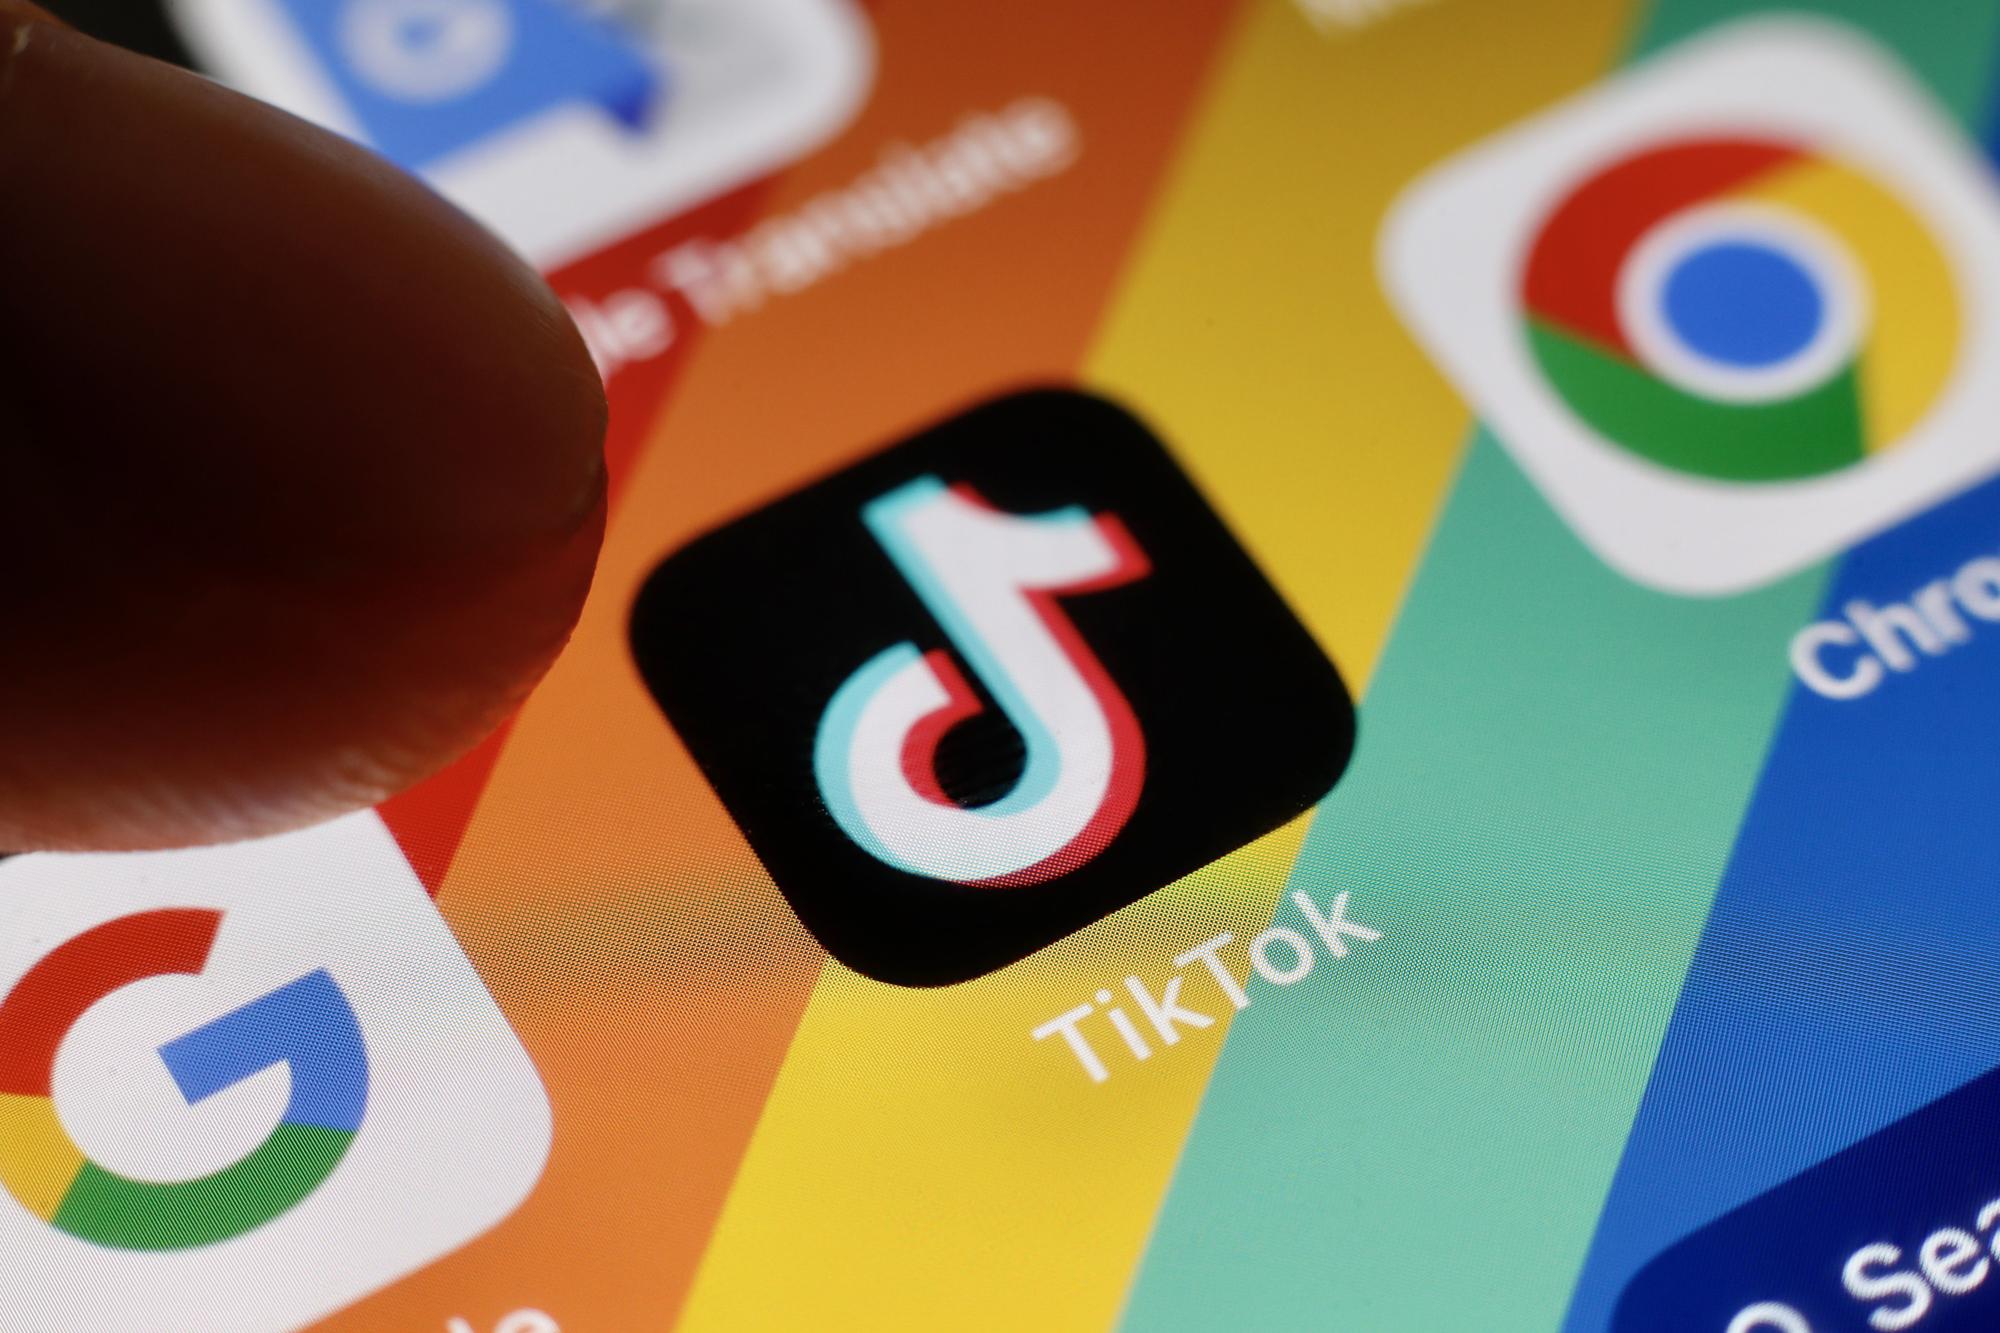 Taiwan bans TikTok from public sector devices